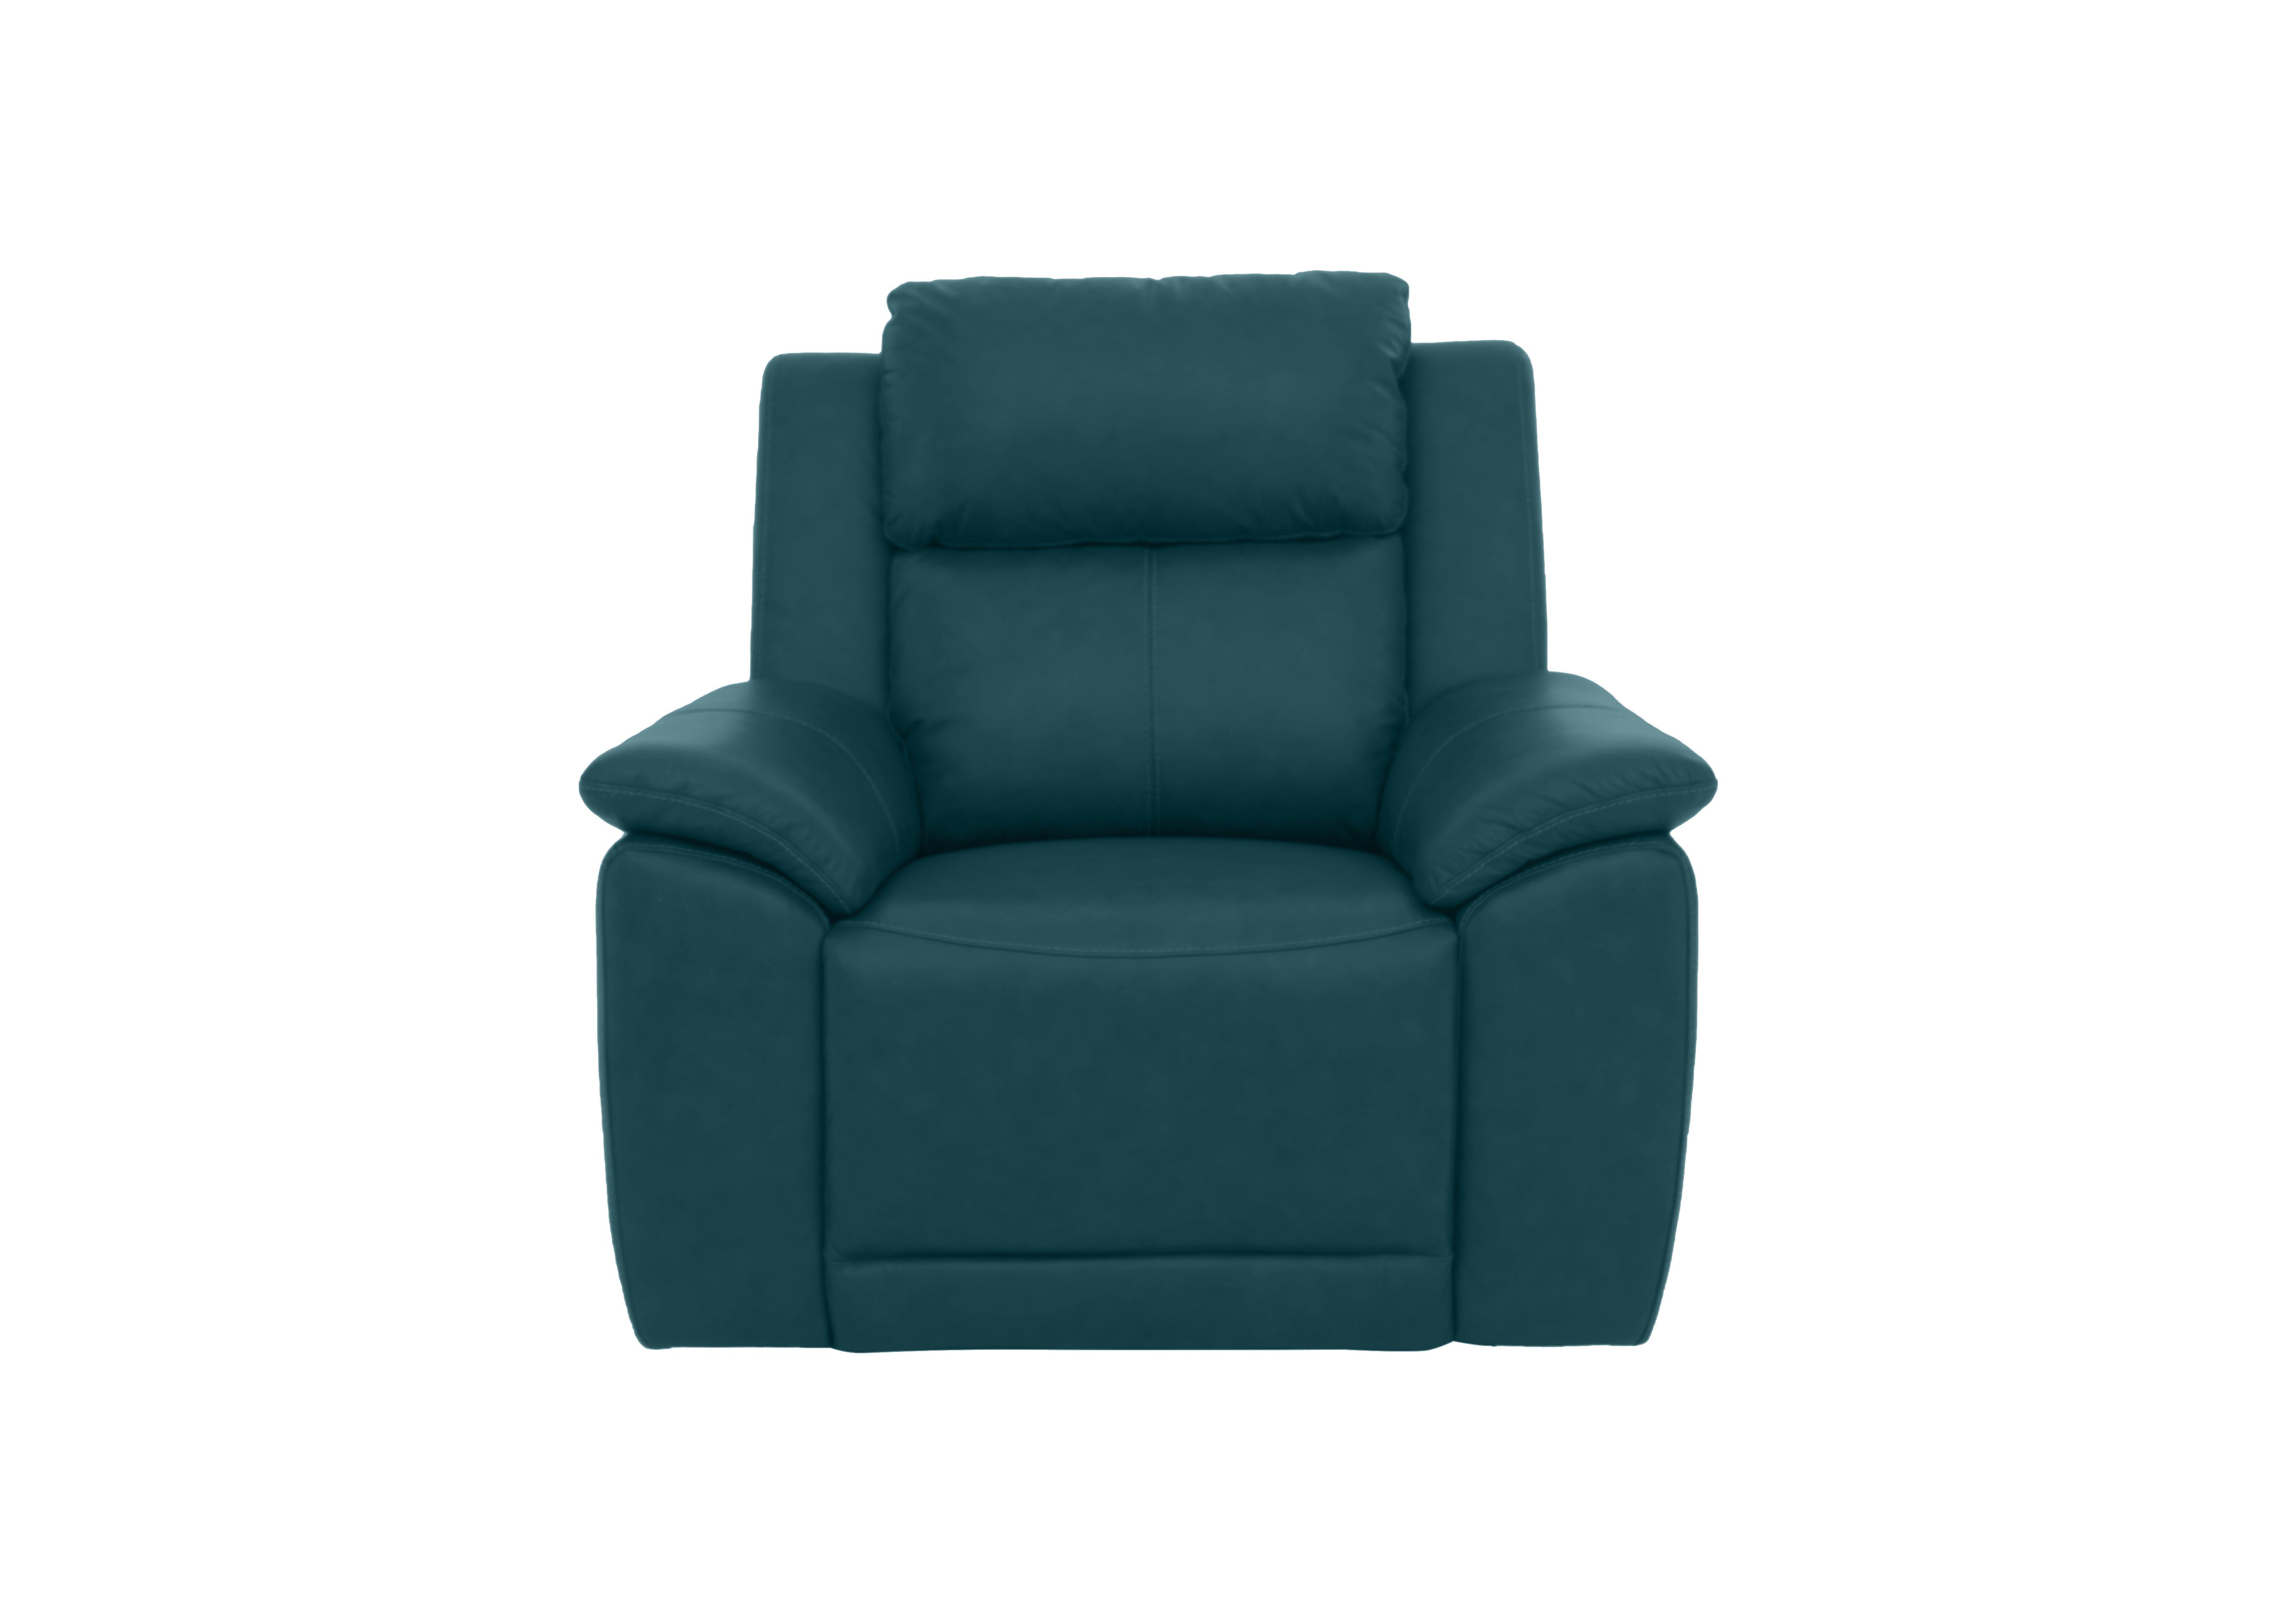 Utah Leather Power Recliner Chair with Power Headrest and Power Lumbar in Midnight Jade Le-9314 on Furniture Village